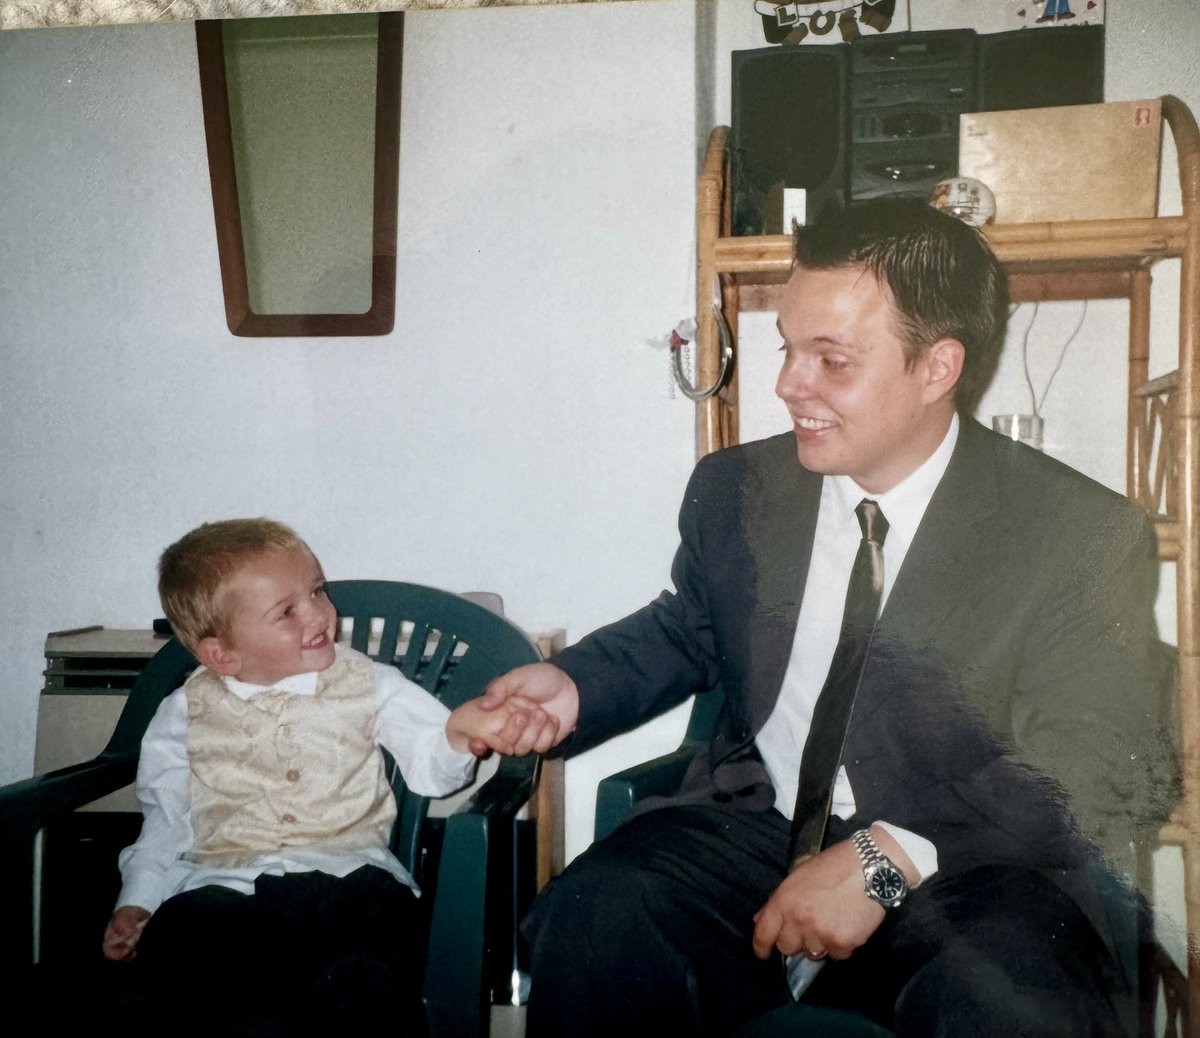 Looking through some old snaps this my wedding day aged 19… The young chap with me is 2 year old Matthew. We had a hand shake on the solar business way back then 🤭. Clearly my idea, just saying! Times change we had patio furniture for living room seats, gifted pass me down